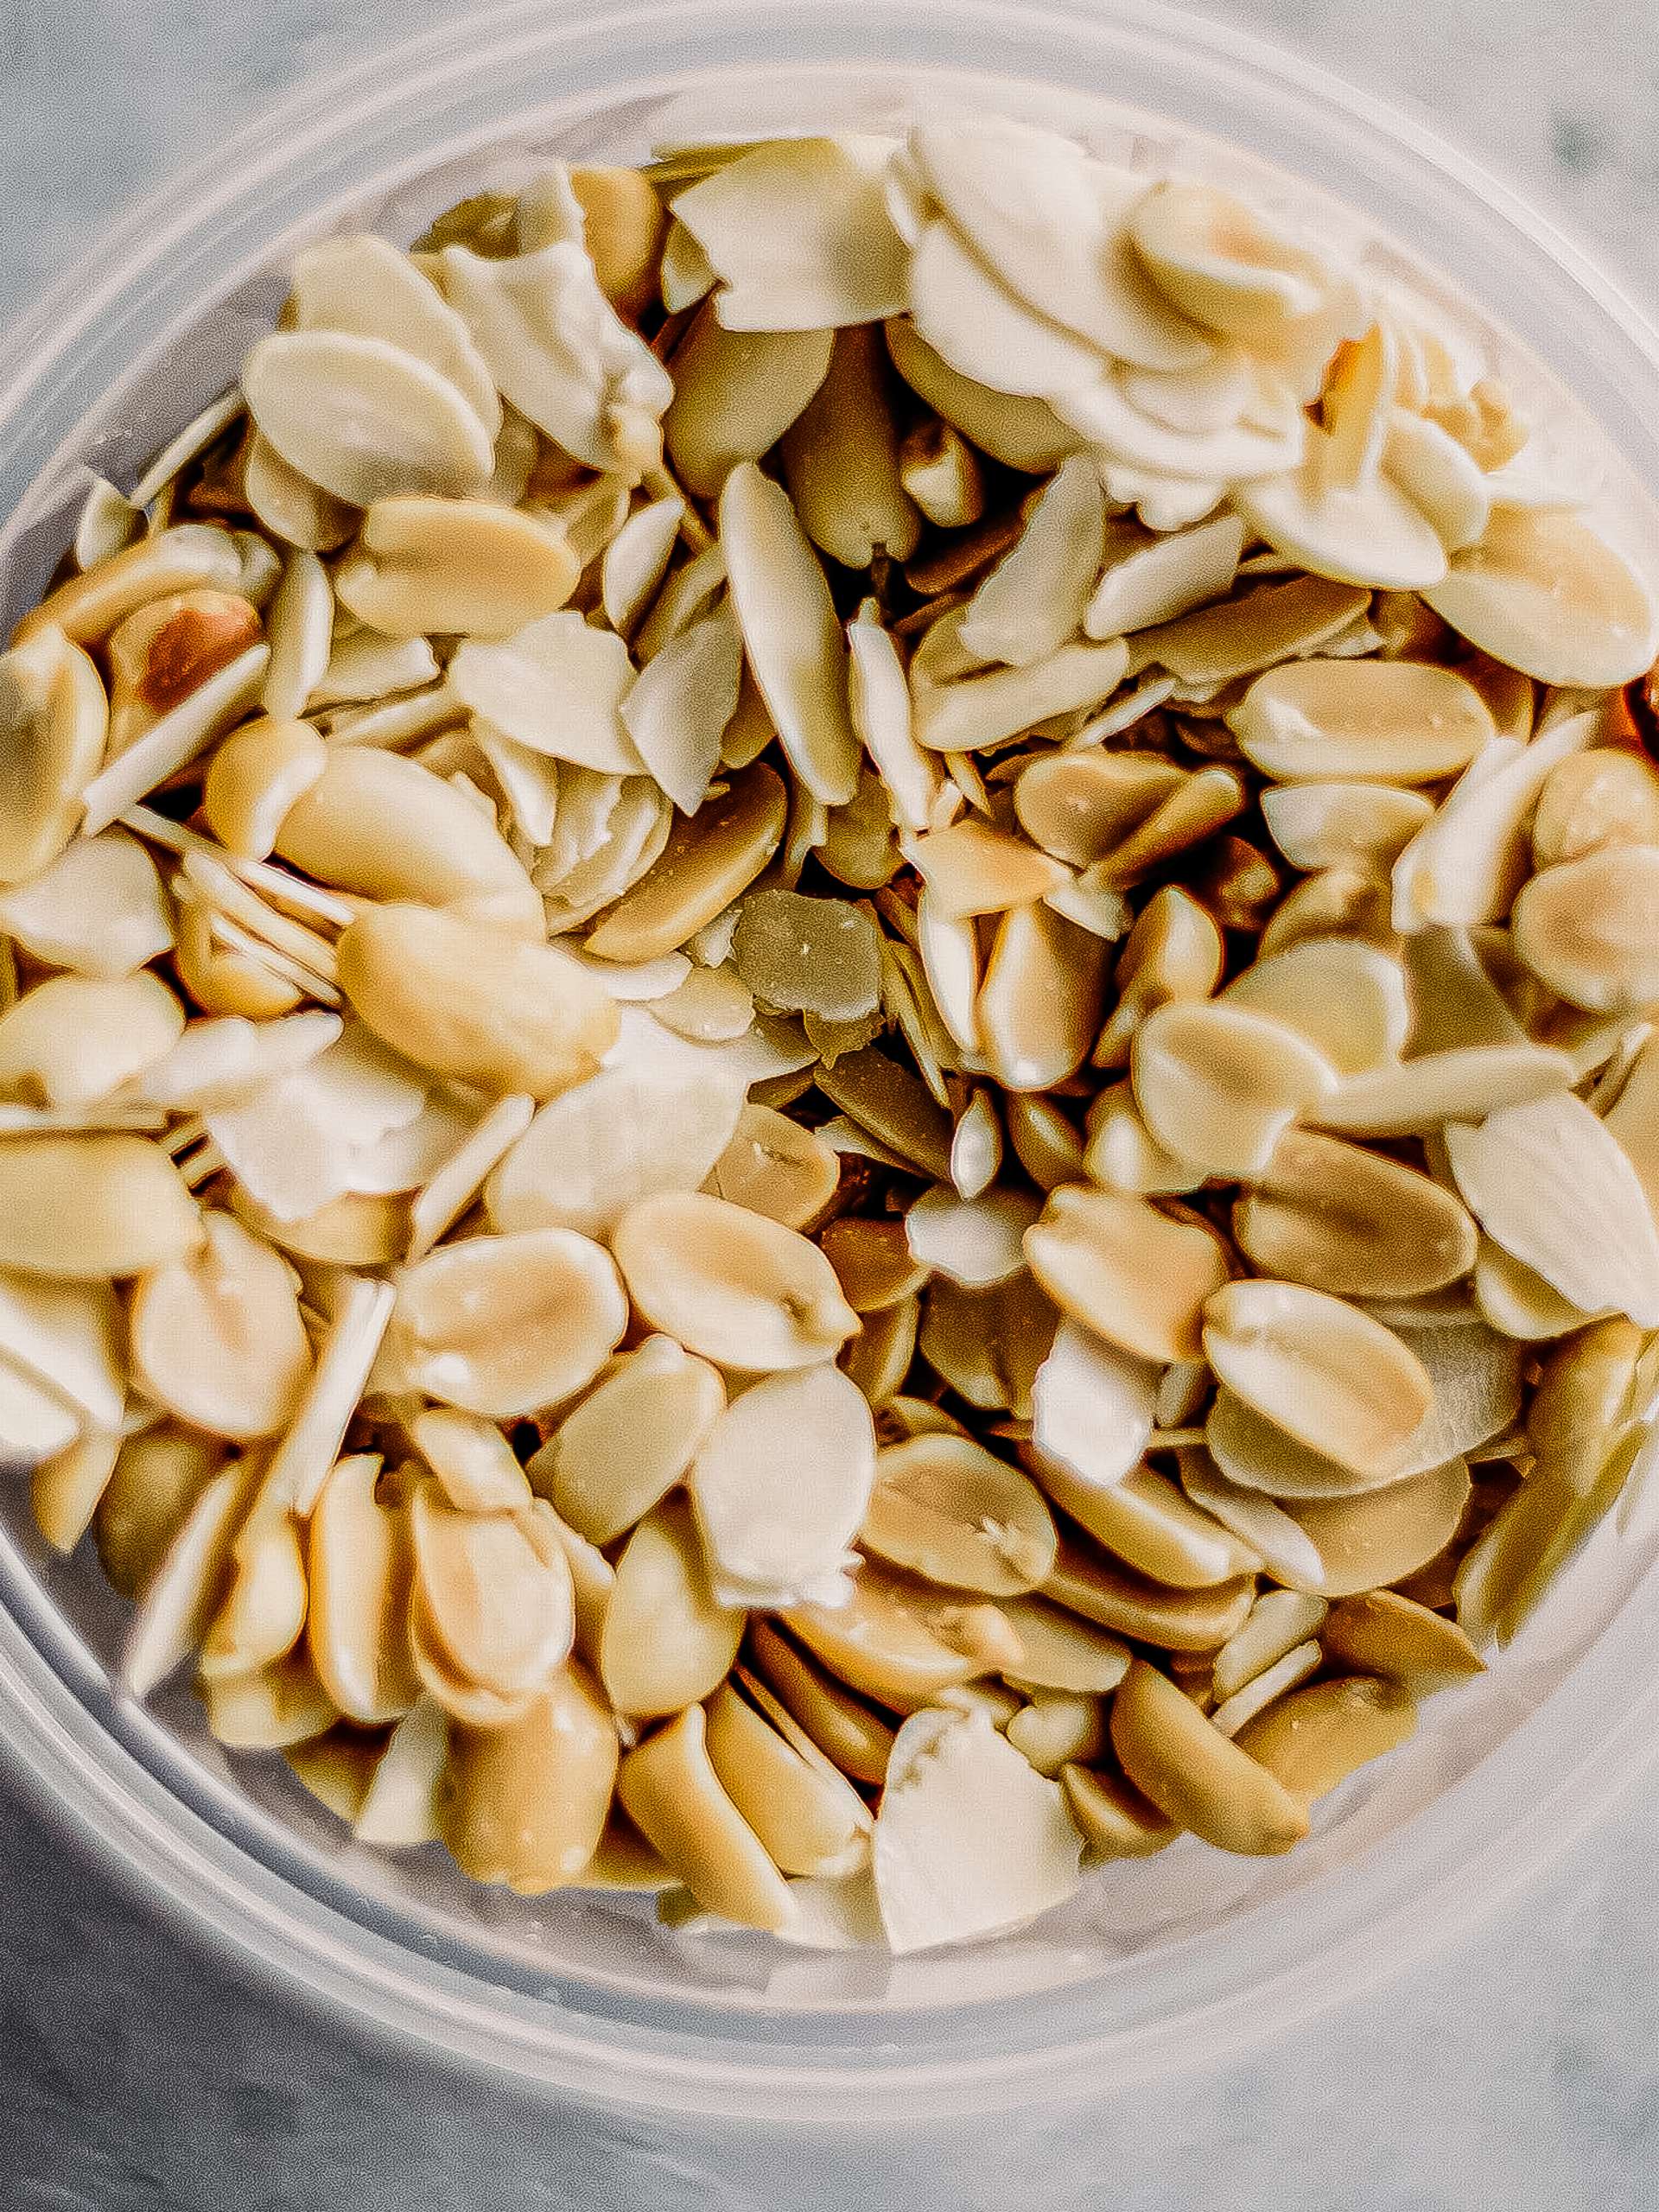 3 Reasons Why Peanuts Are Good For You